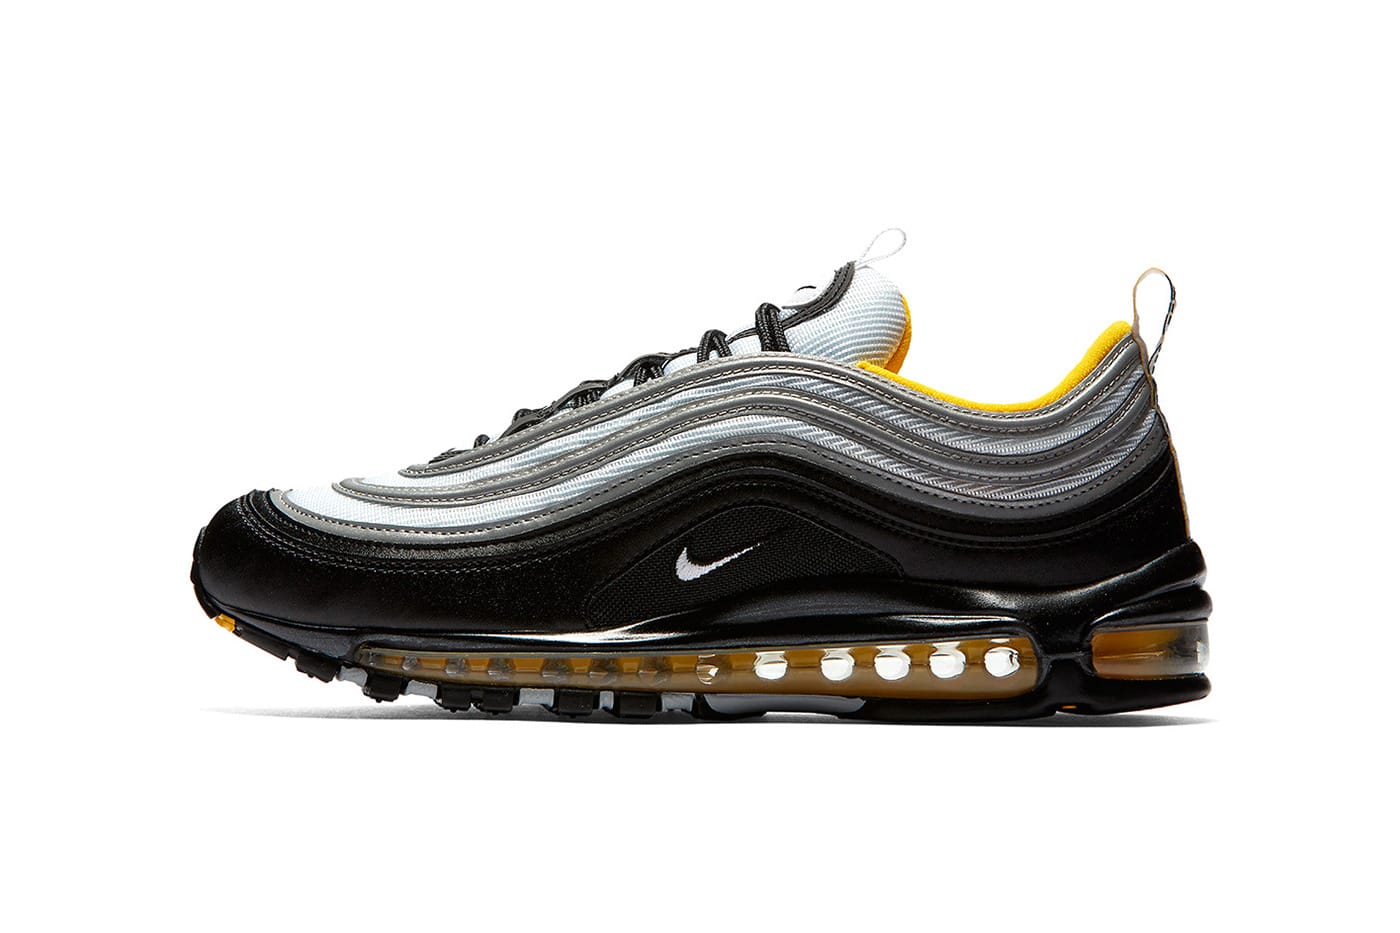 Nike Air Max 97 in Black, White, Yellow 